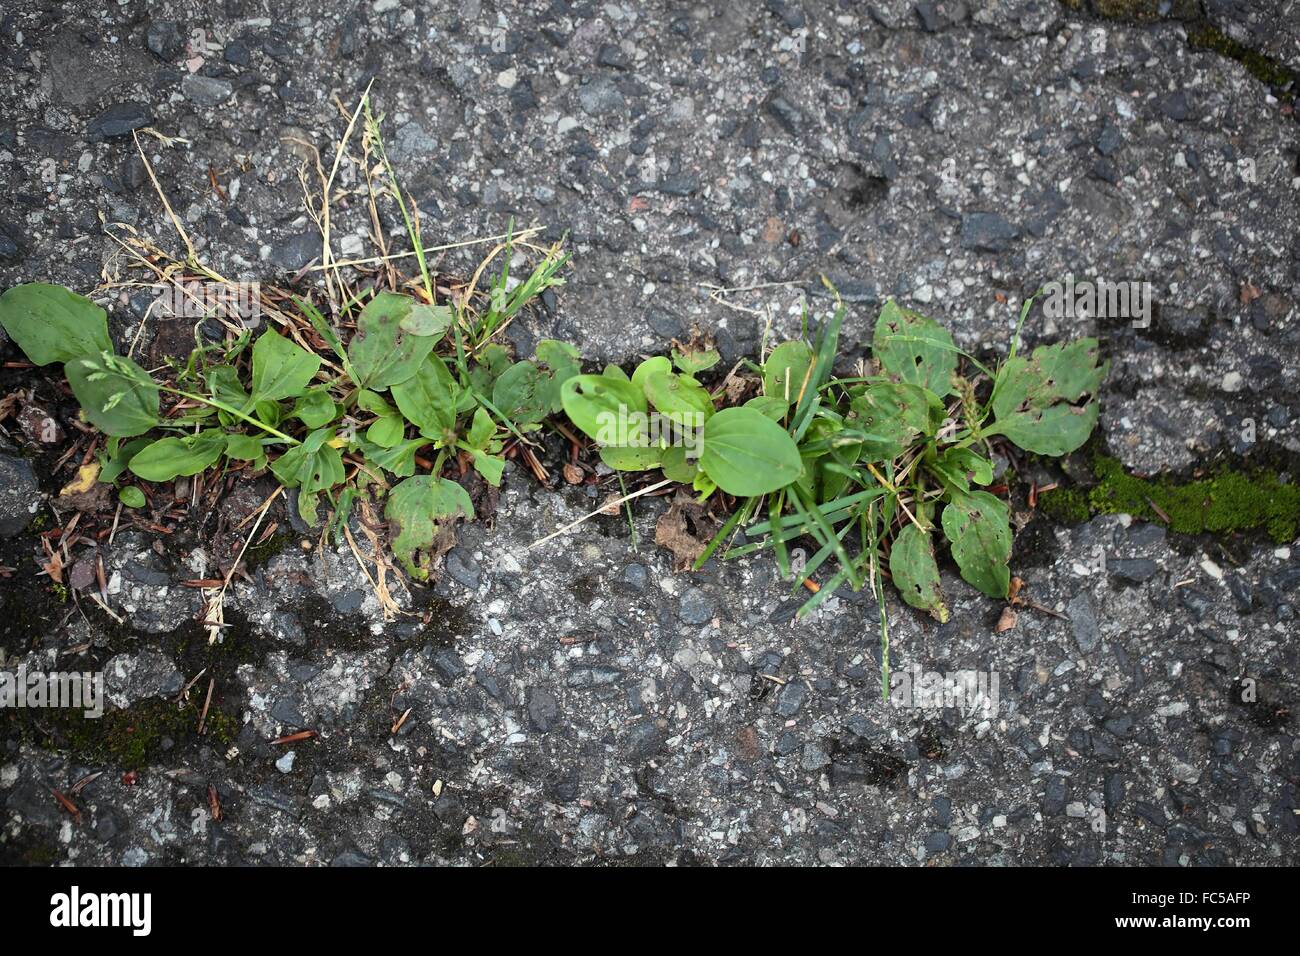 Green plants growing on a tarred road. Stock Photo